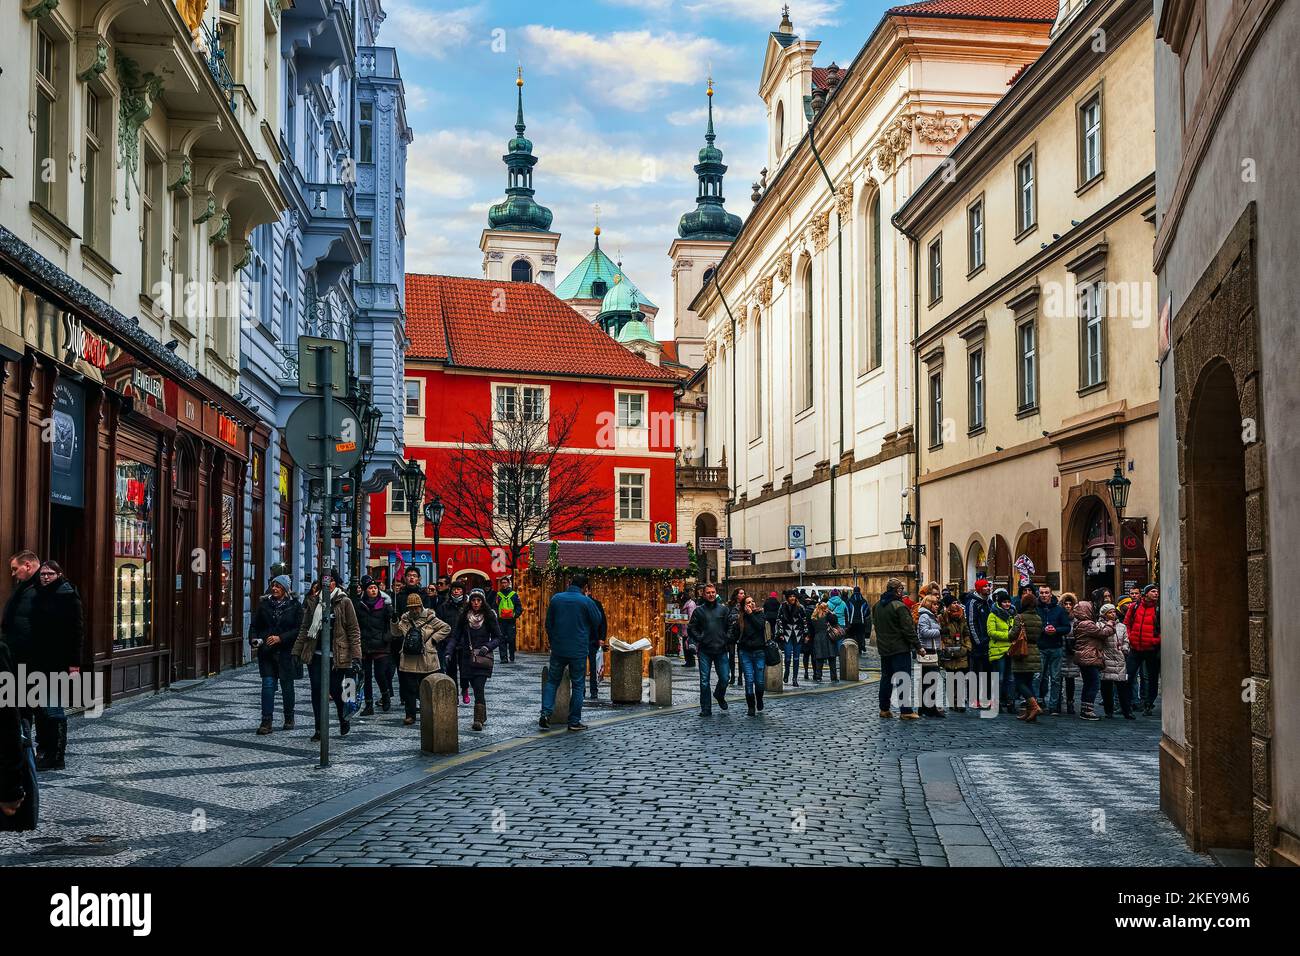 People on narrow cobblestone street among historic buildings in Old Town of Prague - capital of Czechia. Stock Photo